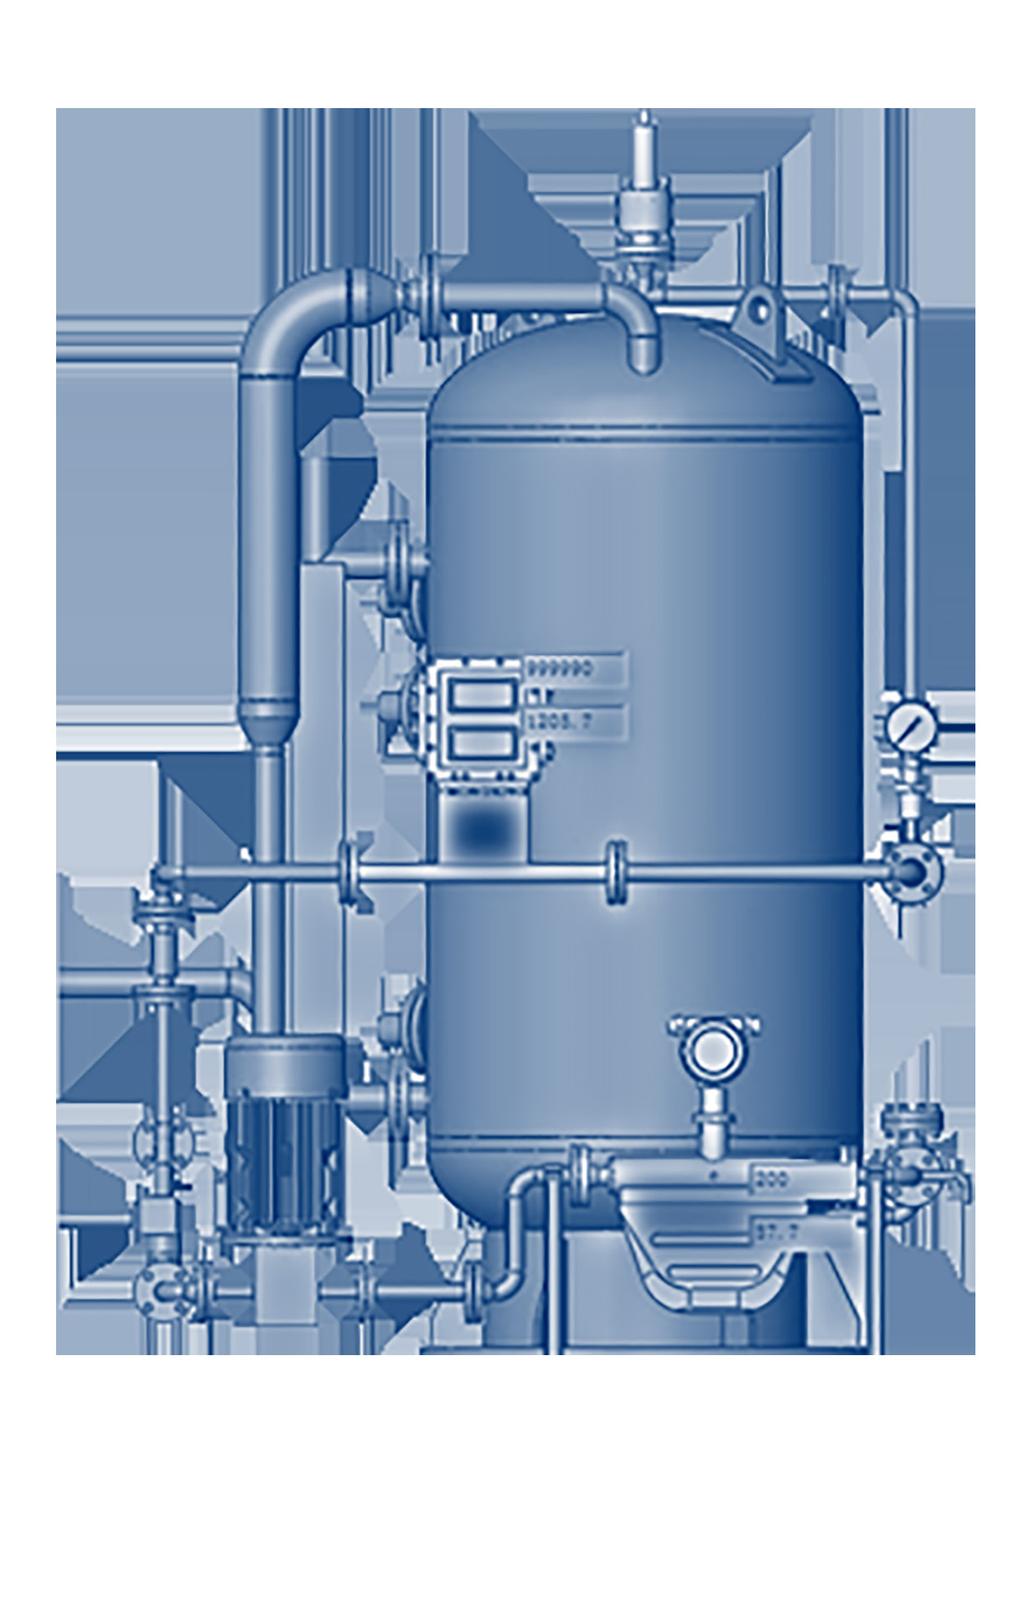 Introduction TekValSys MP Multi-Phase Separator performs continuous three-way separation of gas, oil and water in a one-pass process using a simple mechanical device, without added heat, chemicals or